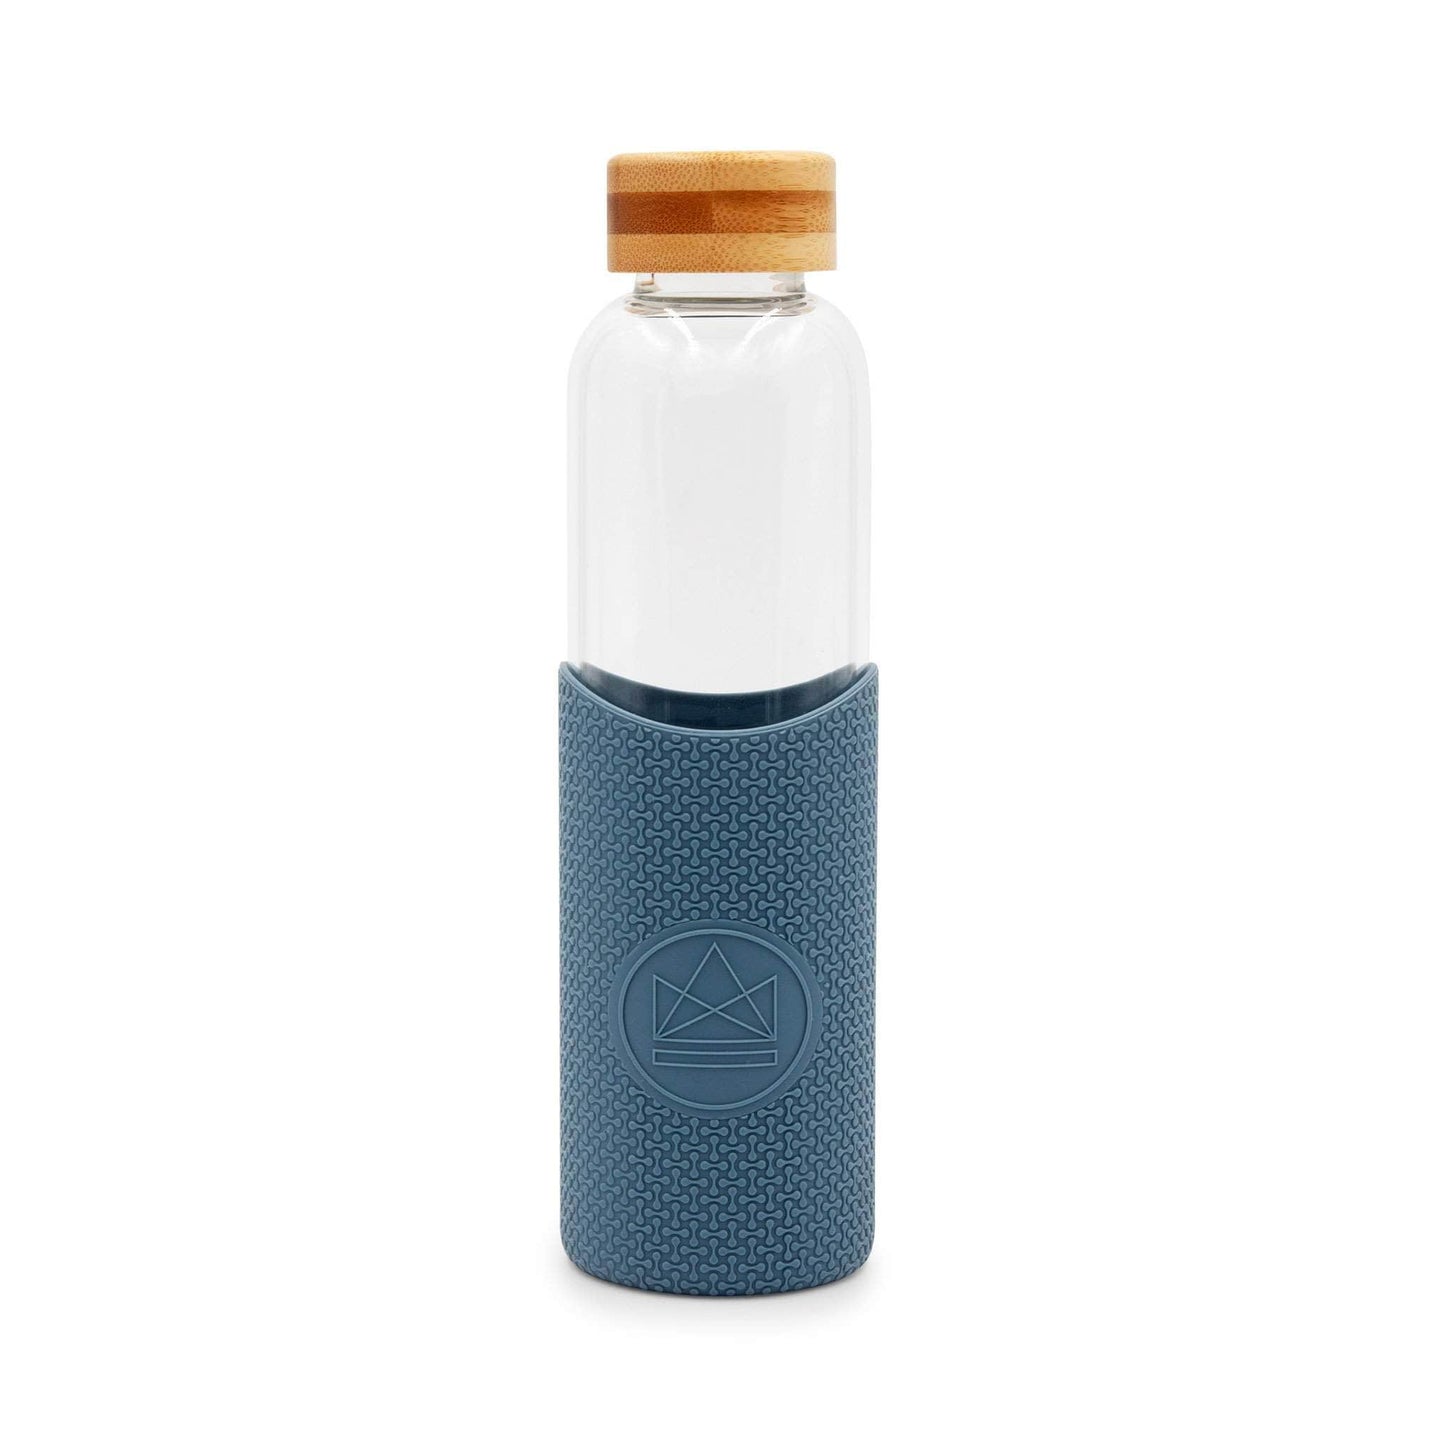 Load image into Gallery viewer, Neon Kactus Water Bottle Neon Kactus - Glass Water Bottles - 550ml - Super Sonic Pastel Blue
